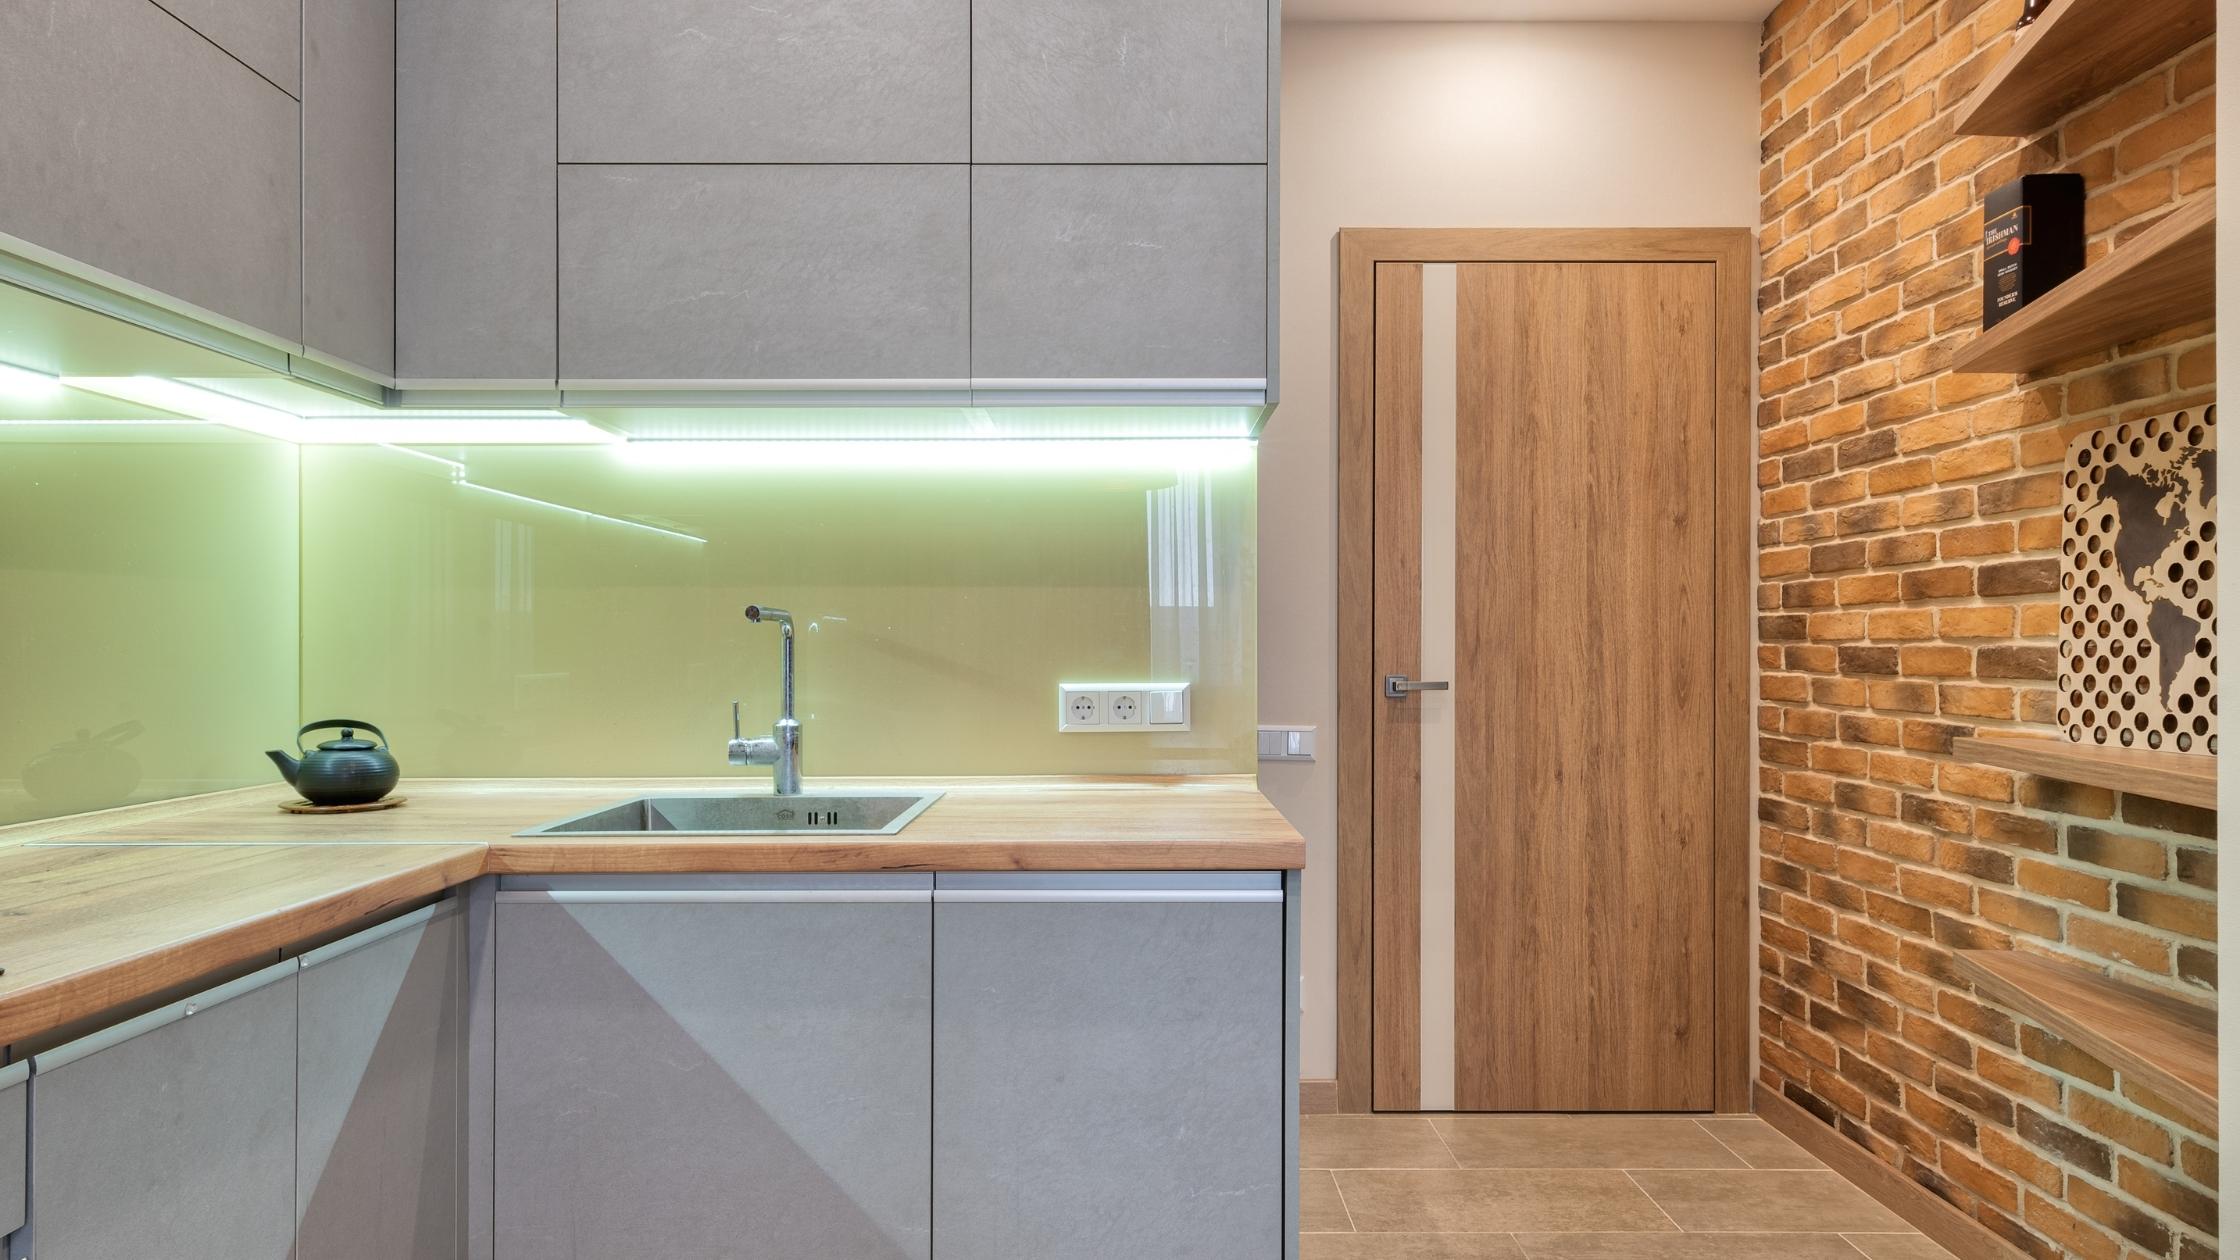 How to Use Undercabinet Lighting